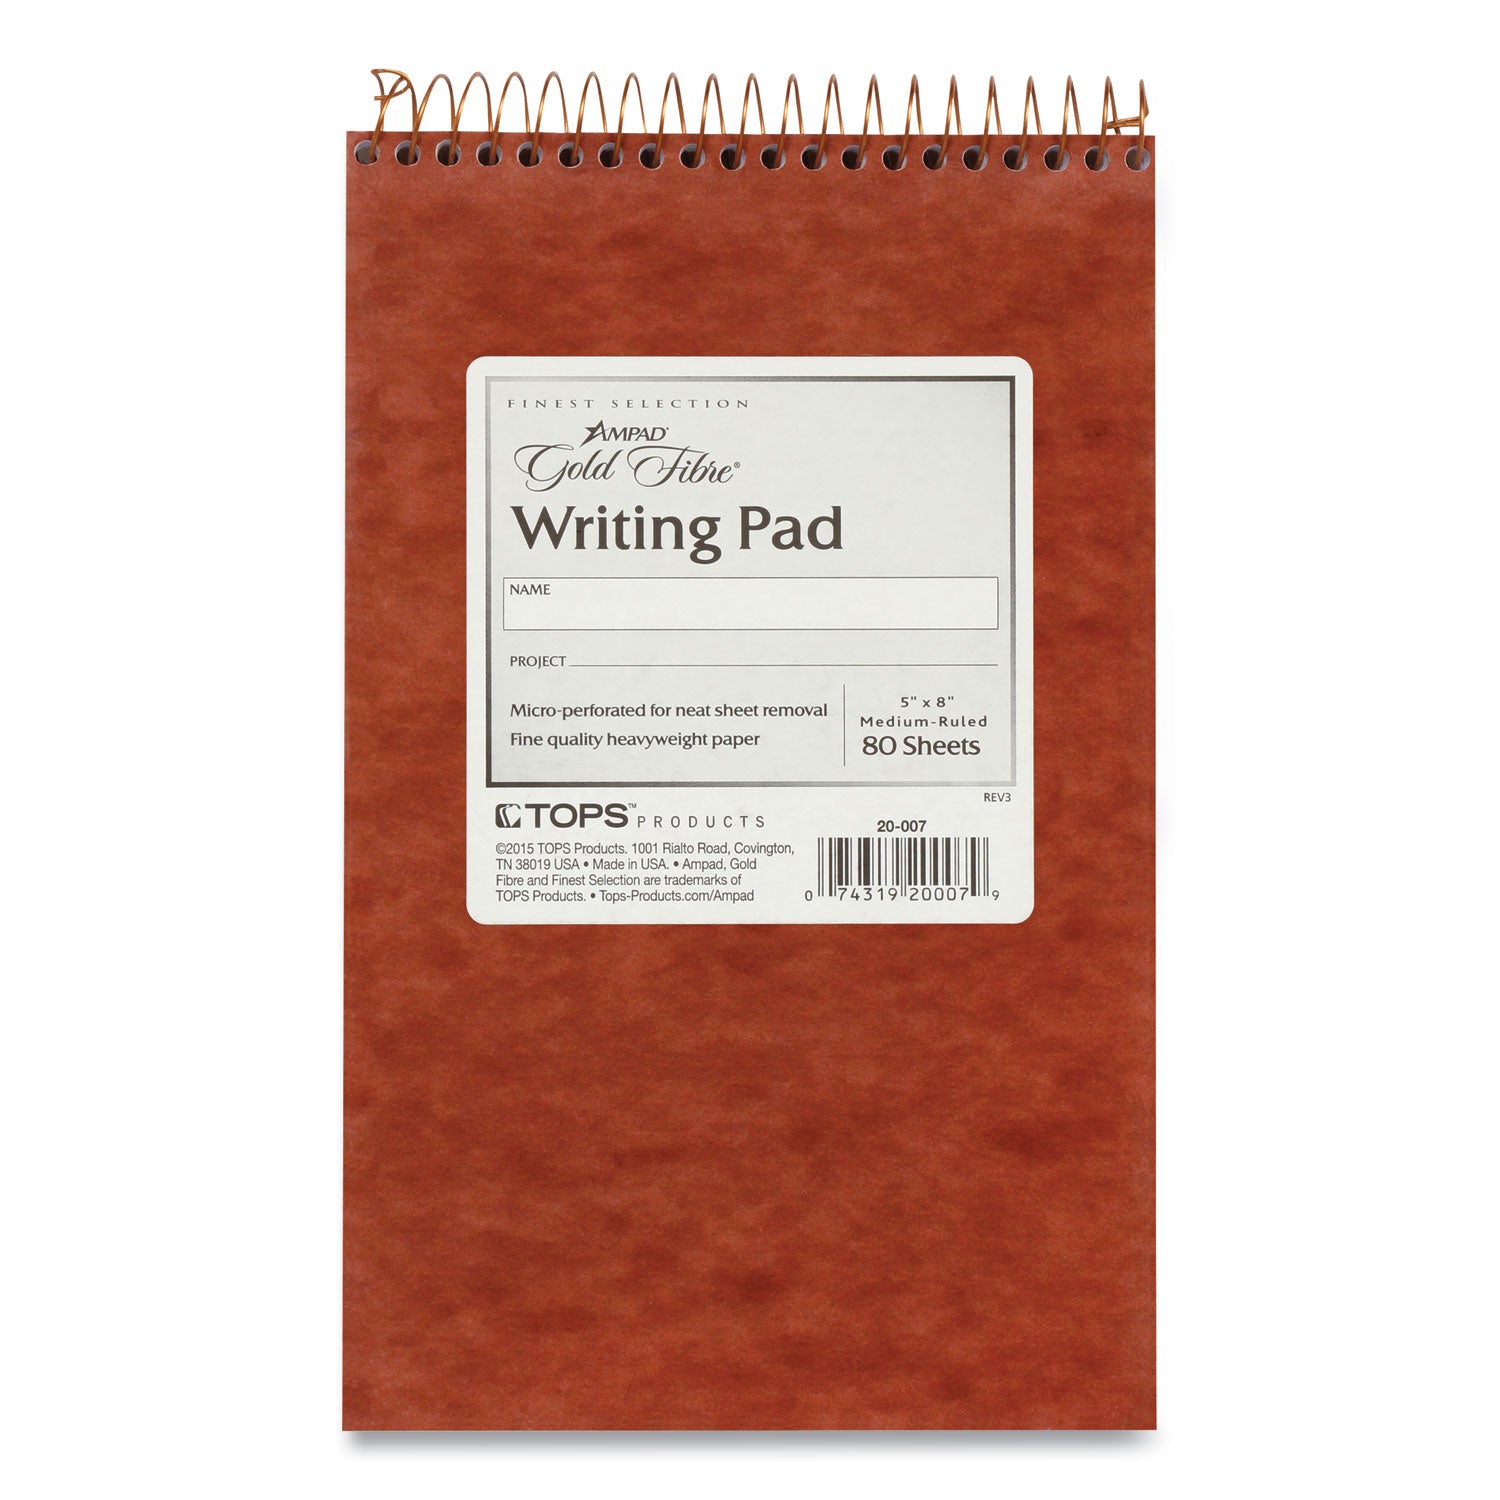 Gold Fibre Retro Wirebound Writing Pads, Medium/College Rule, Red Cover, 80 White 5 x 8 Sheets - 